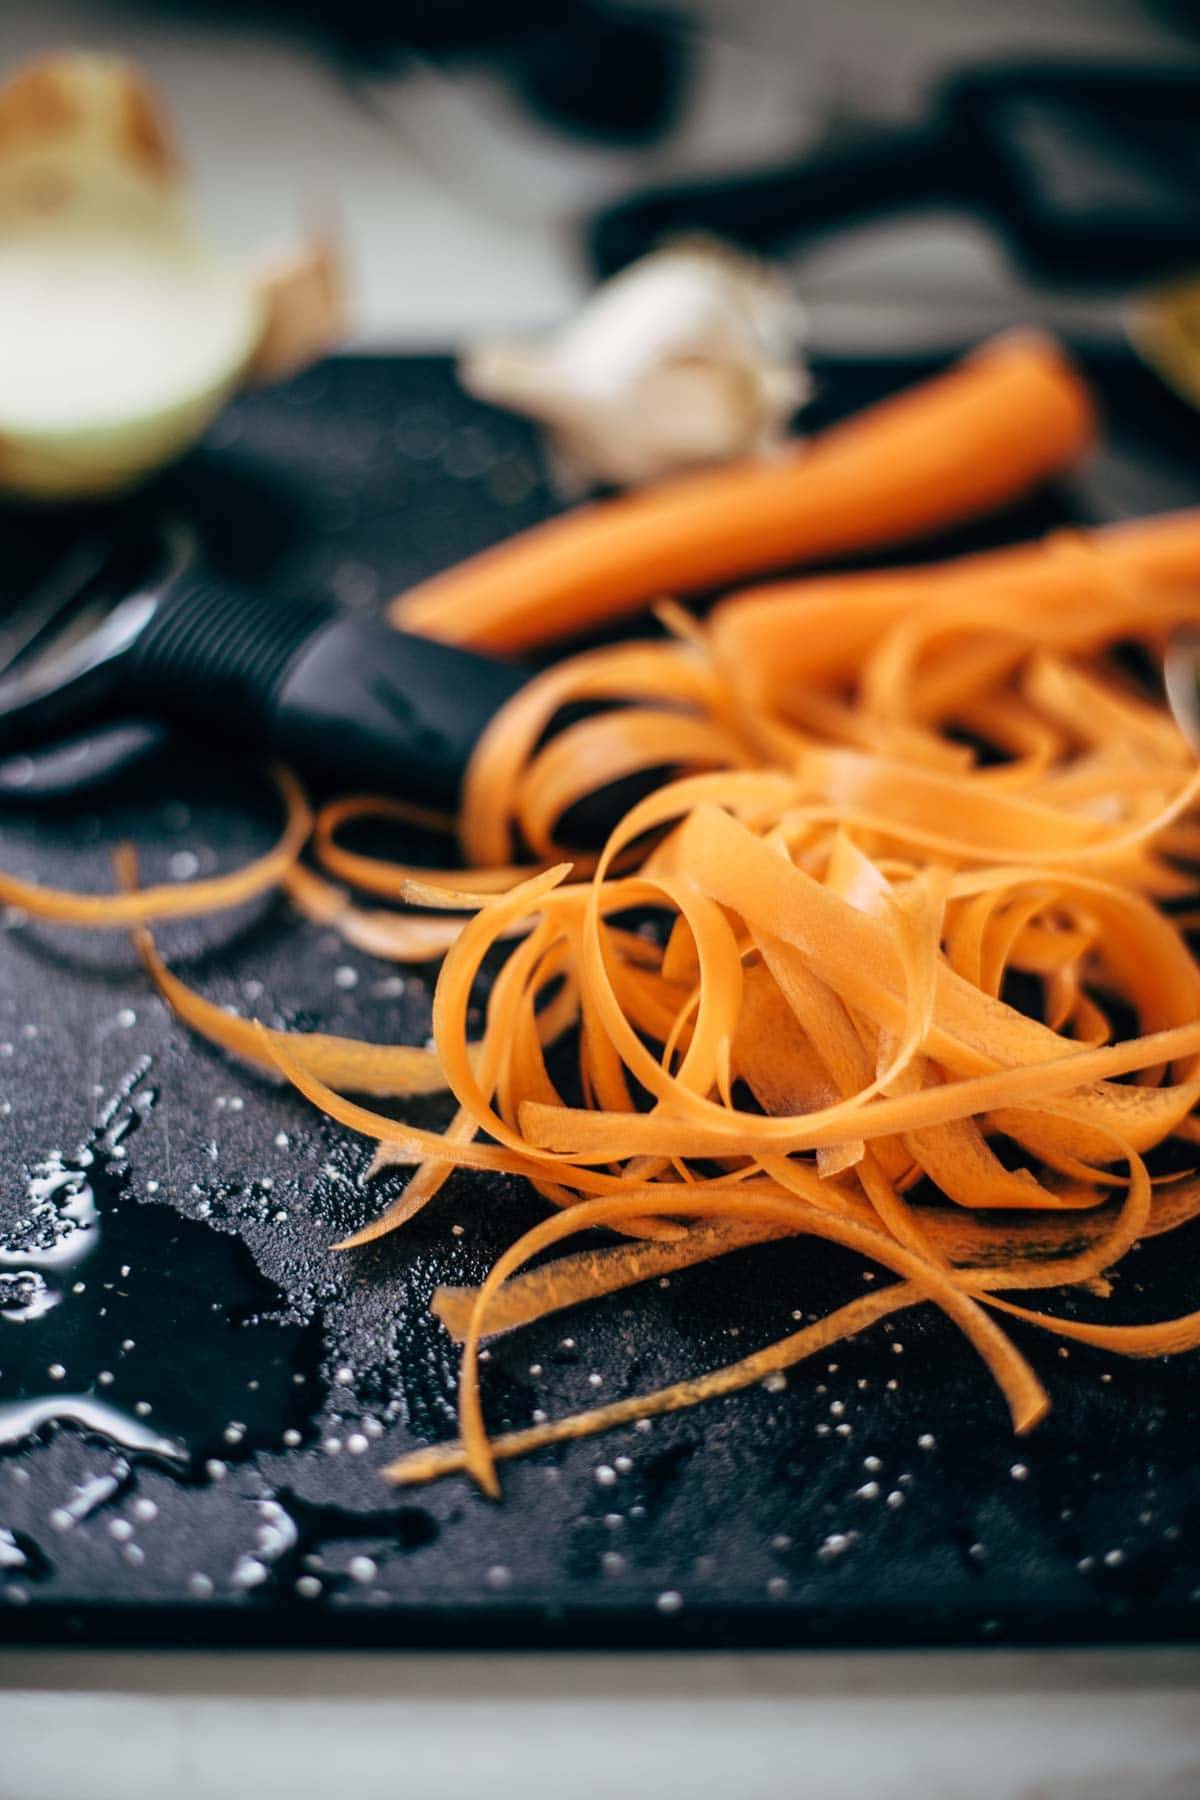 Peeled carrots on a cutting board